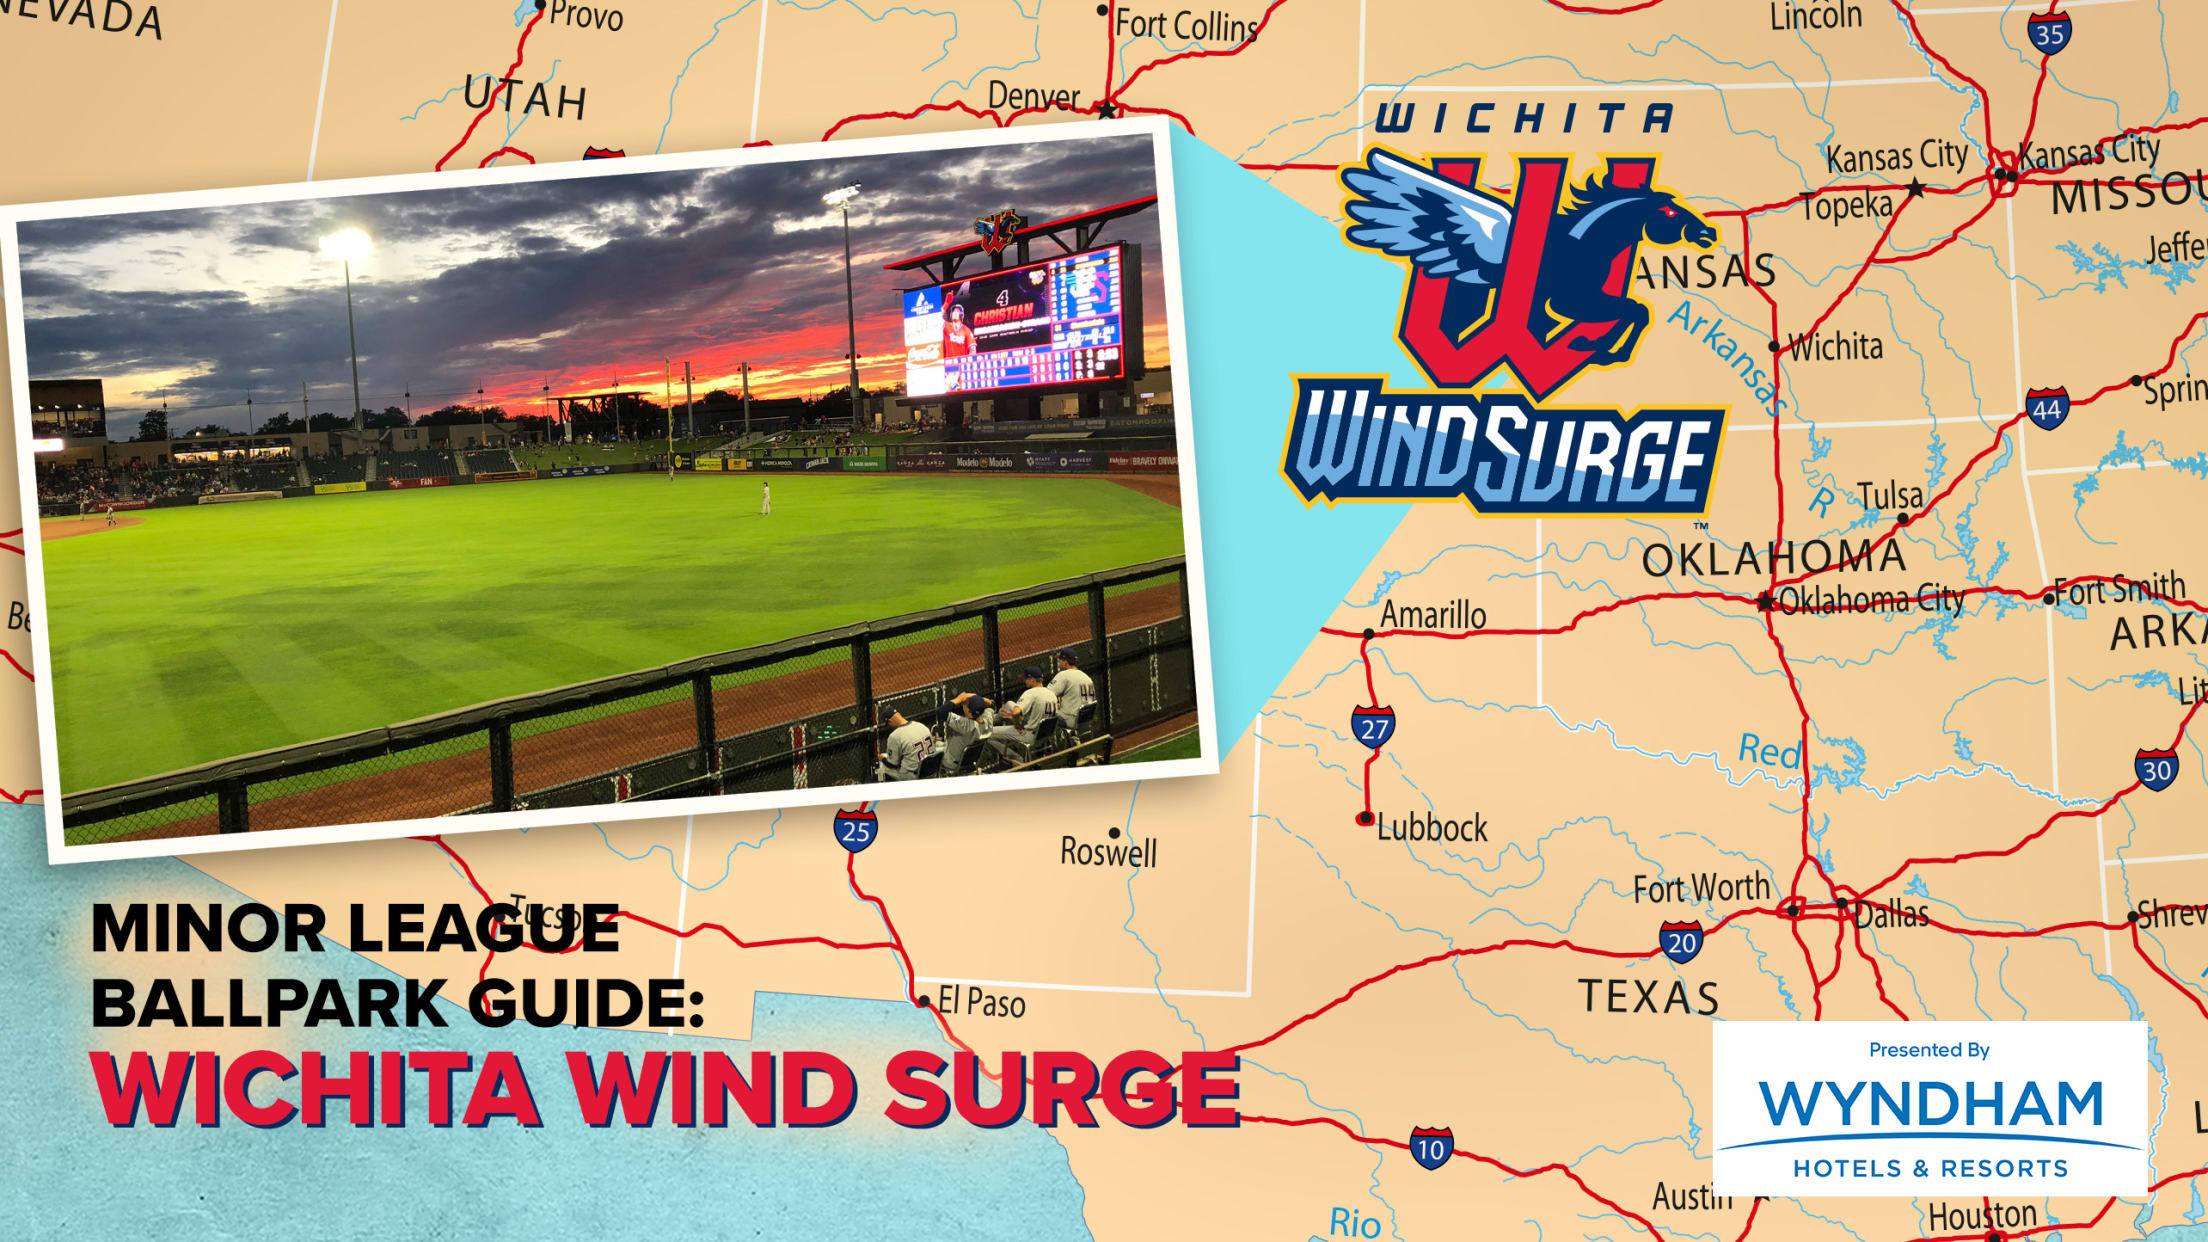 Your Guide to Riverfront Stadium and the Wichita Wind Surge